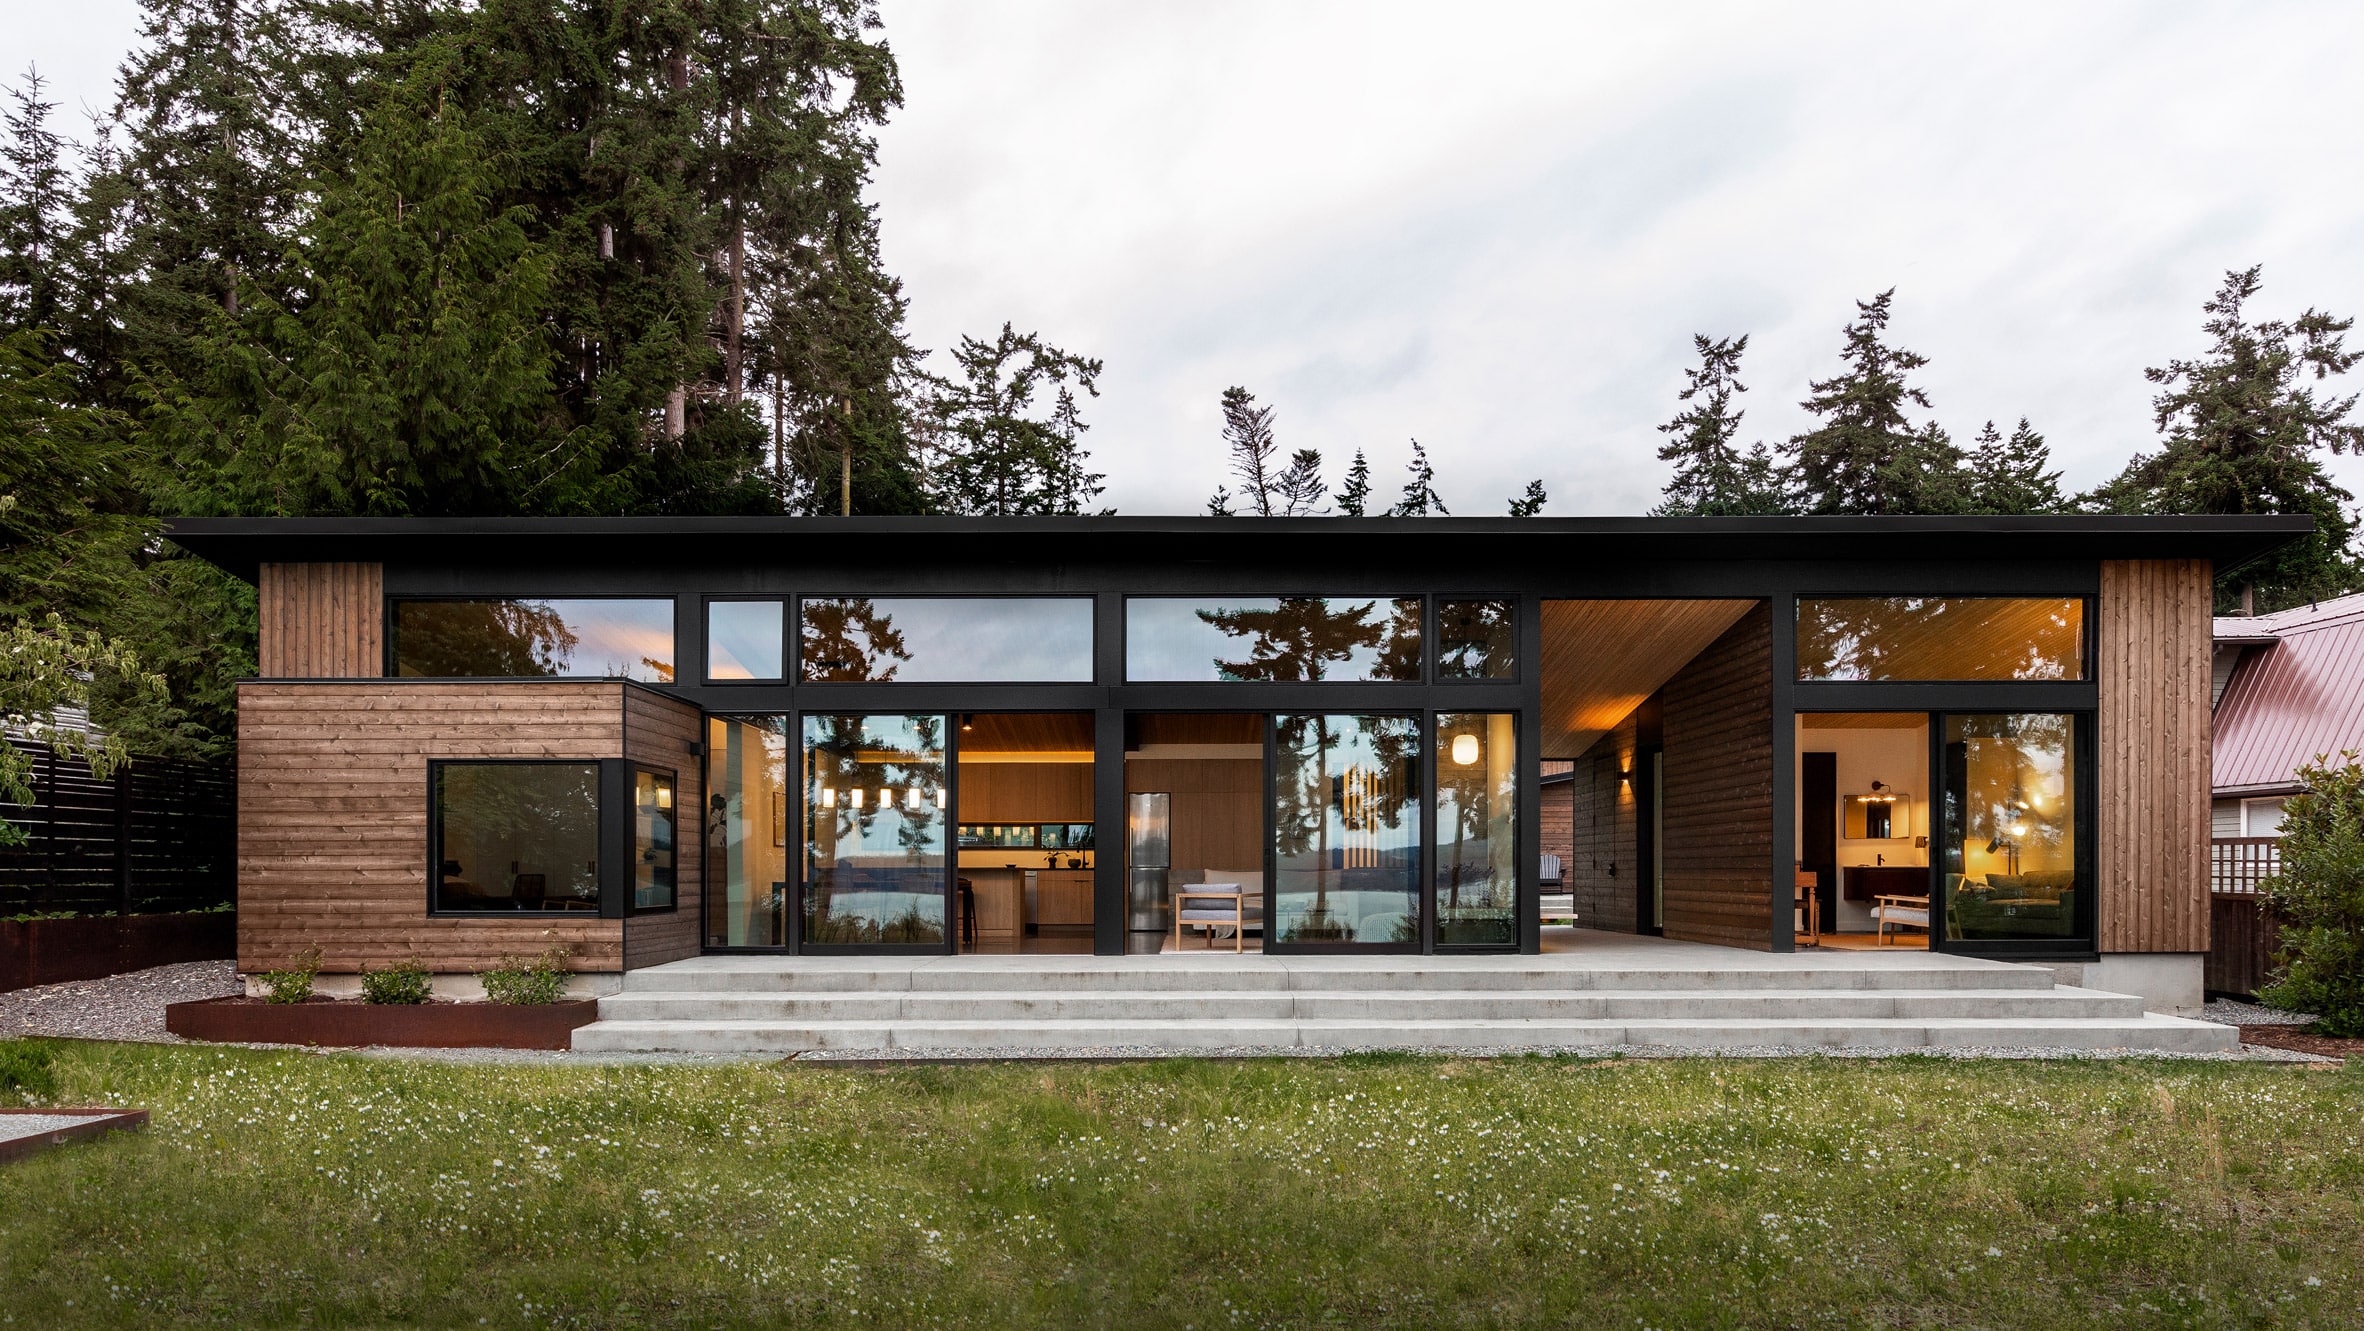 Whidbey Dogtrot by SHED Architecture and Design in Washington